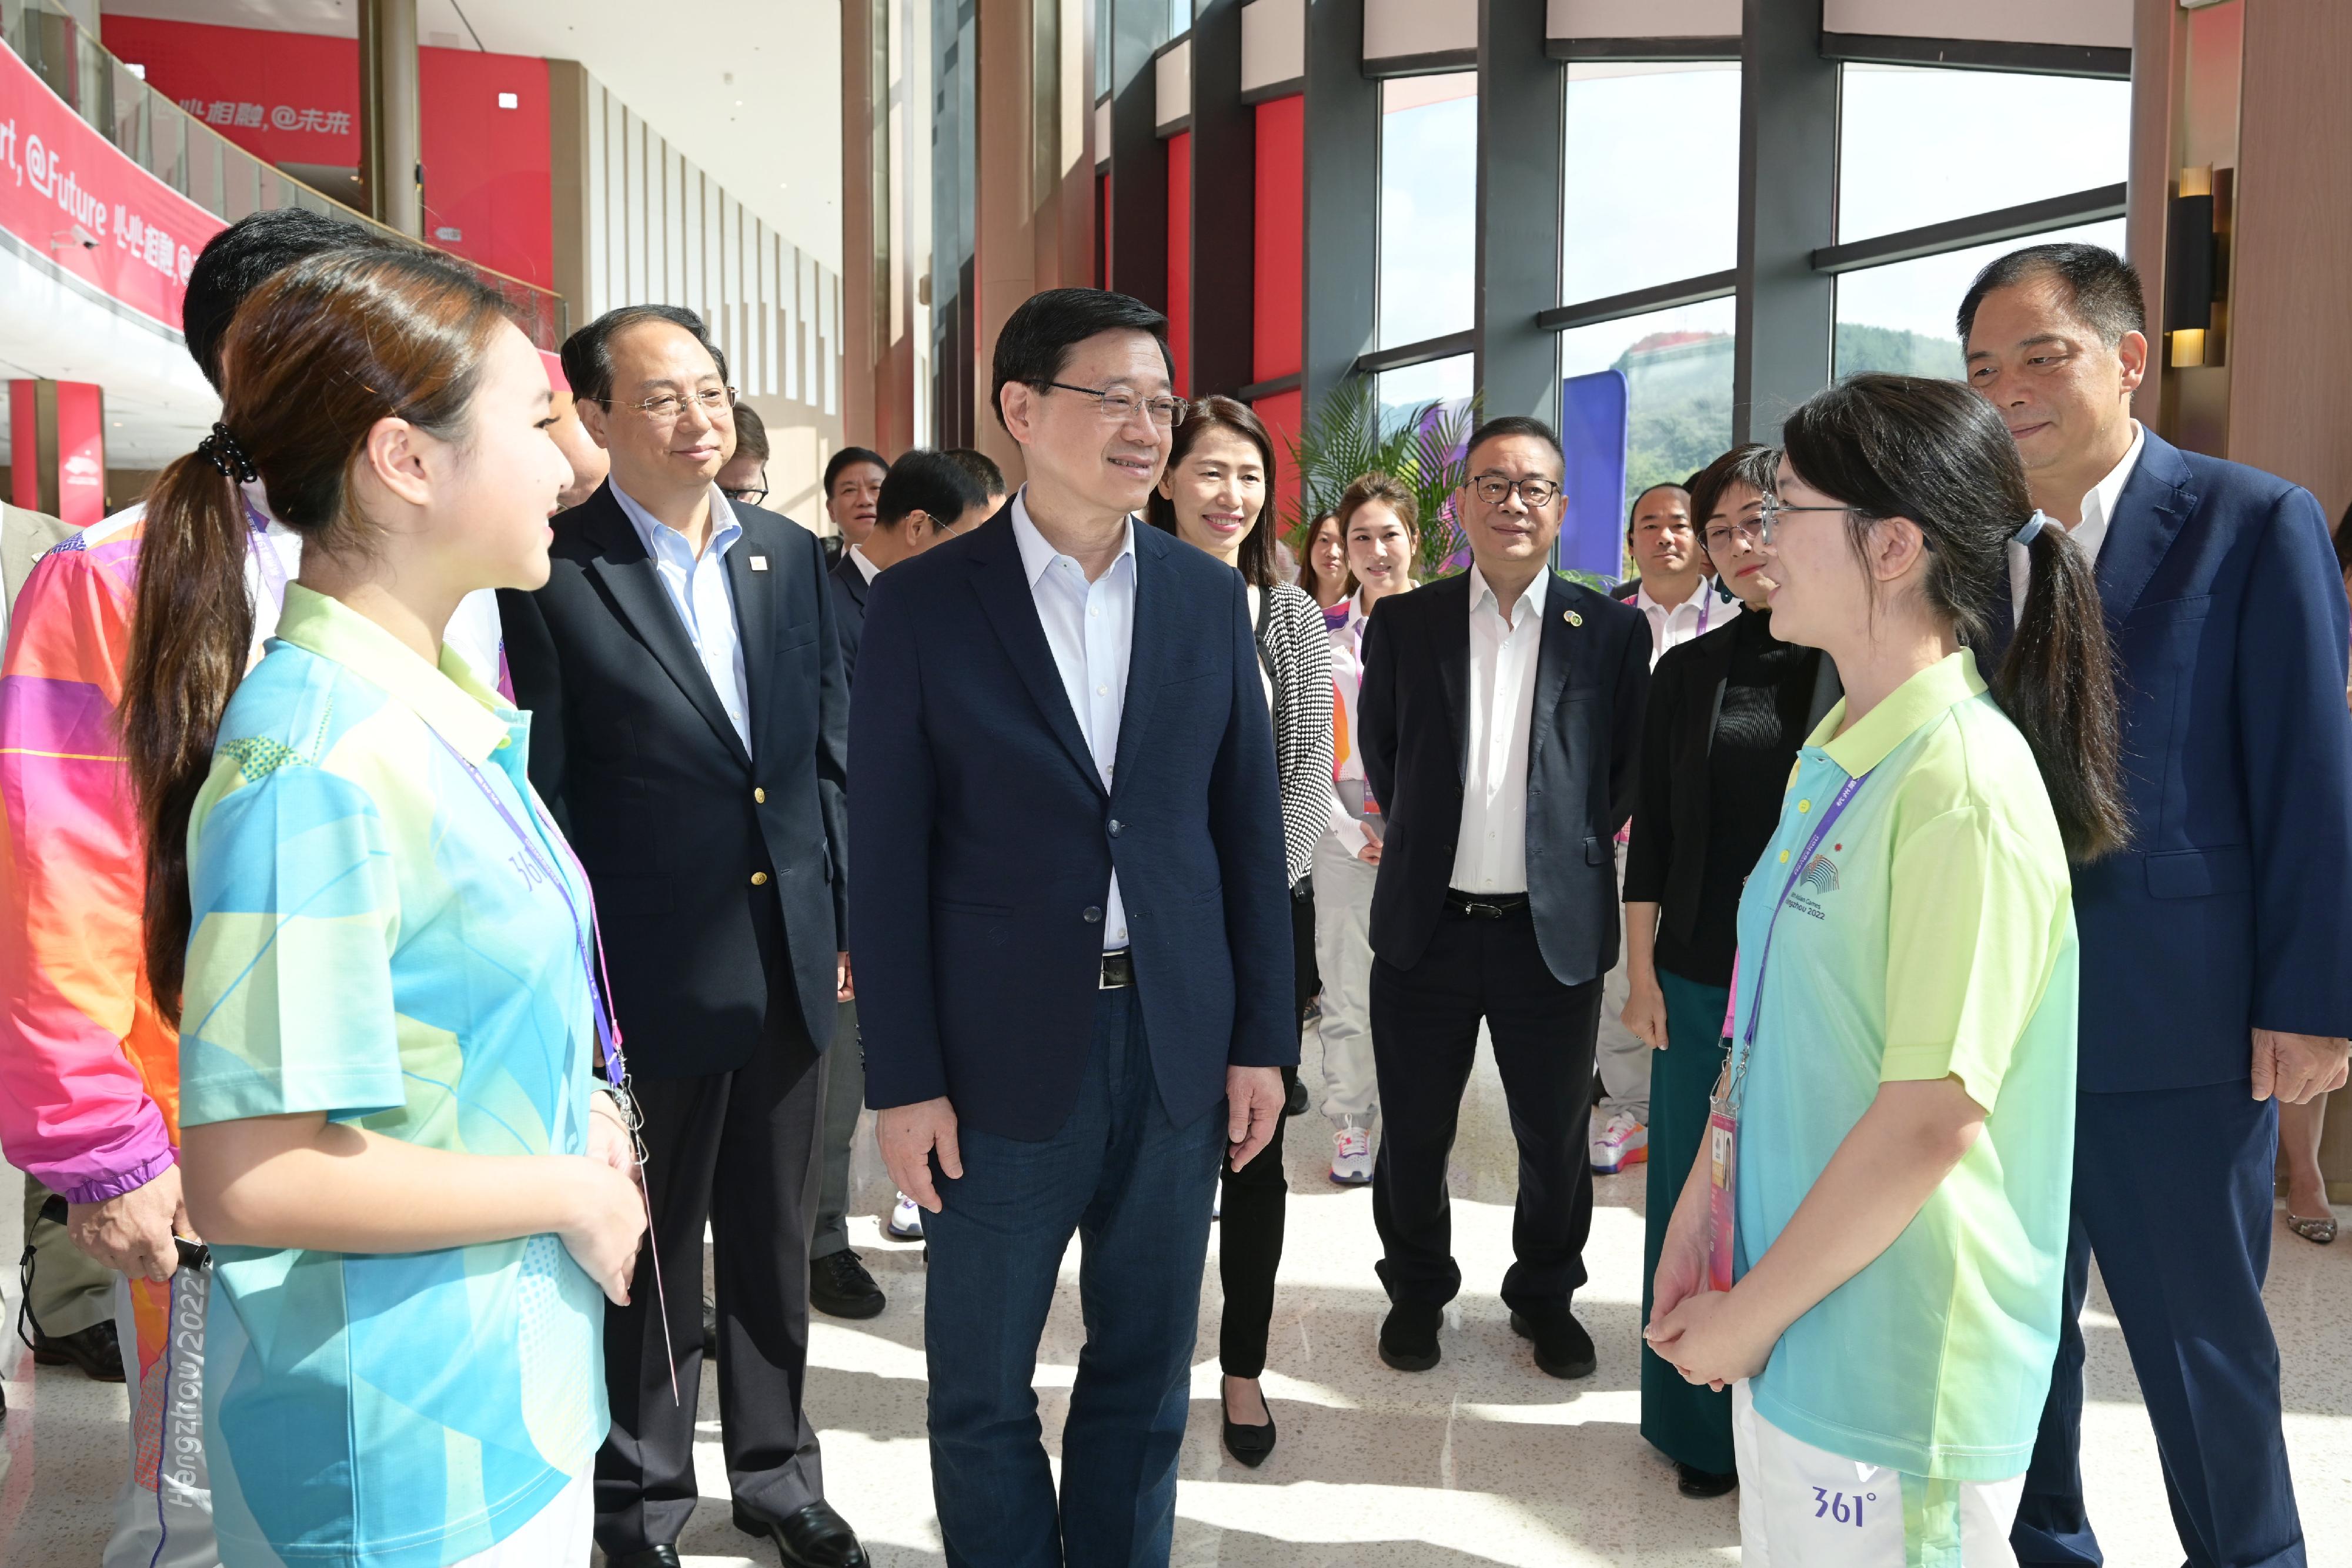 The Chief Executive, Mr John Lee, led a Hong Kong Special Administrative Region Government delegation to Hangzhou and continued his visit programme today (September 25). Photo shows Mr Lee (third left) chatting with the volunteers of the 19th Asian Games Hangzhou.